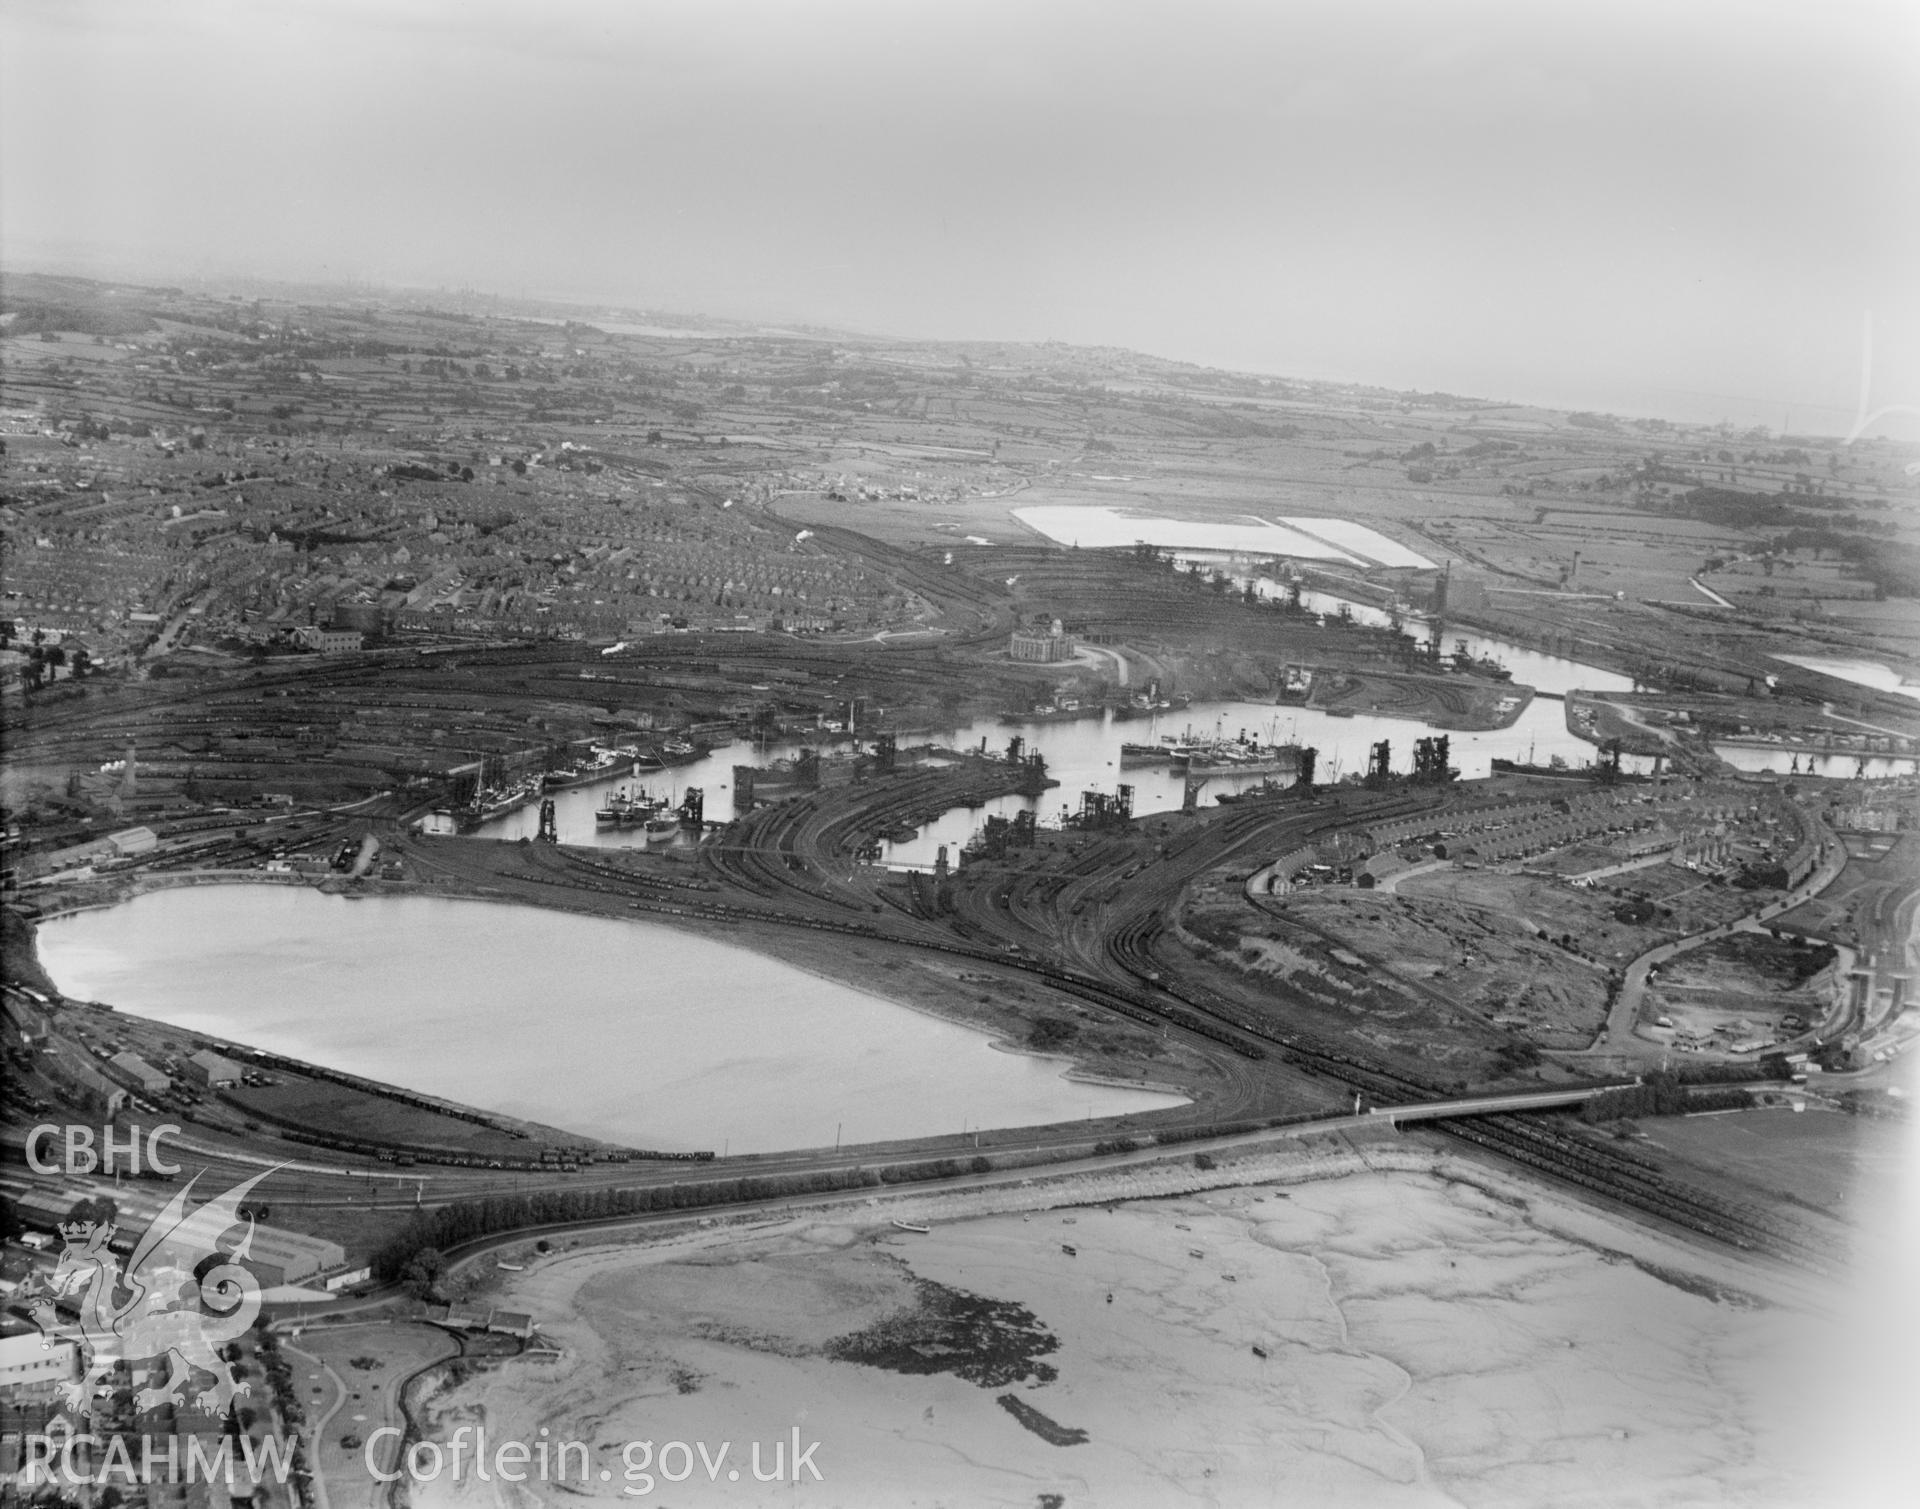 Distant view of Barry, docks and town, oblique aerial view. 5?x4? black and white glass plate negative.